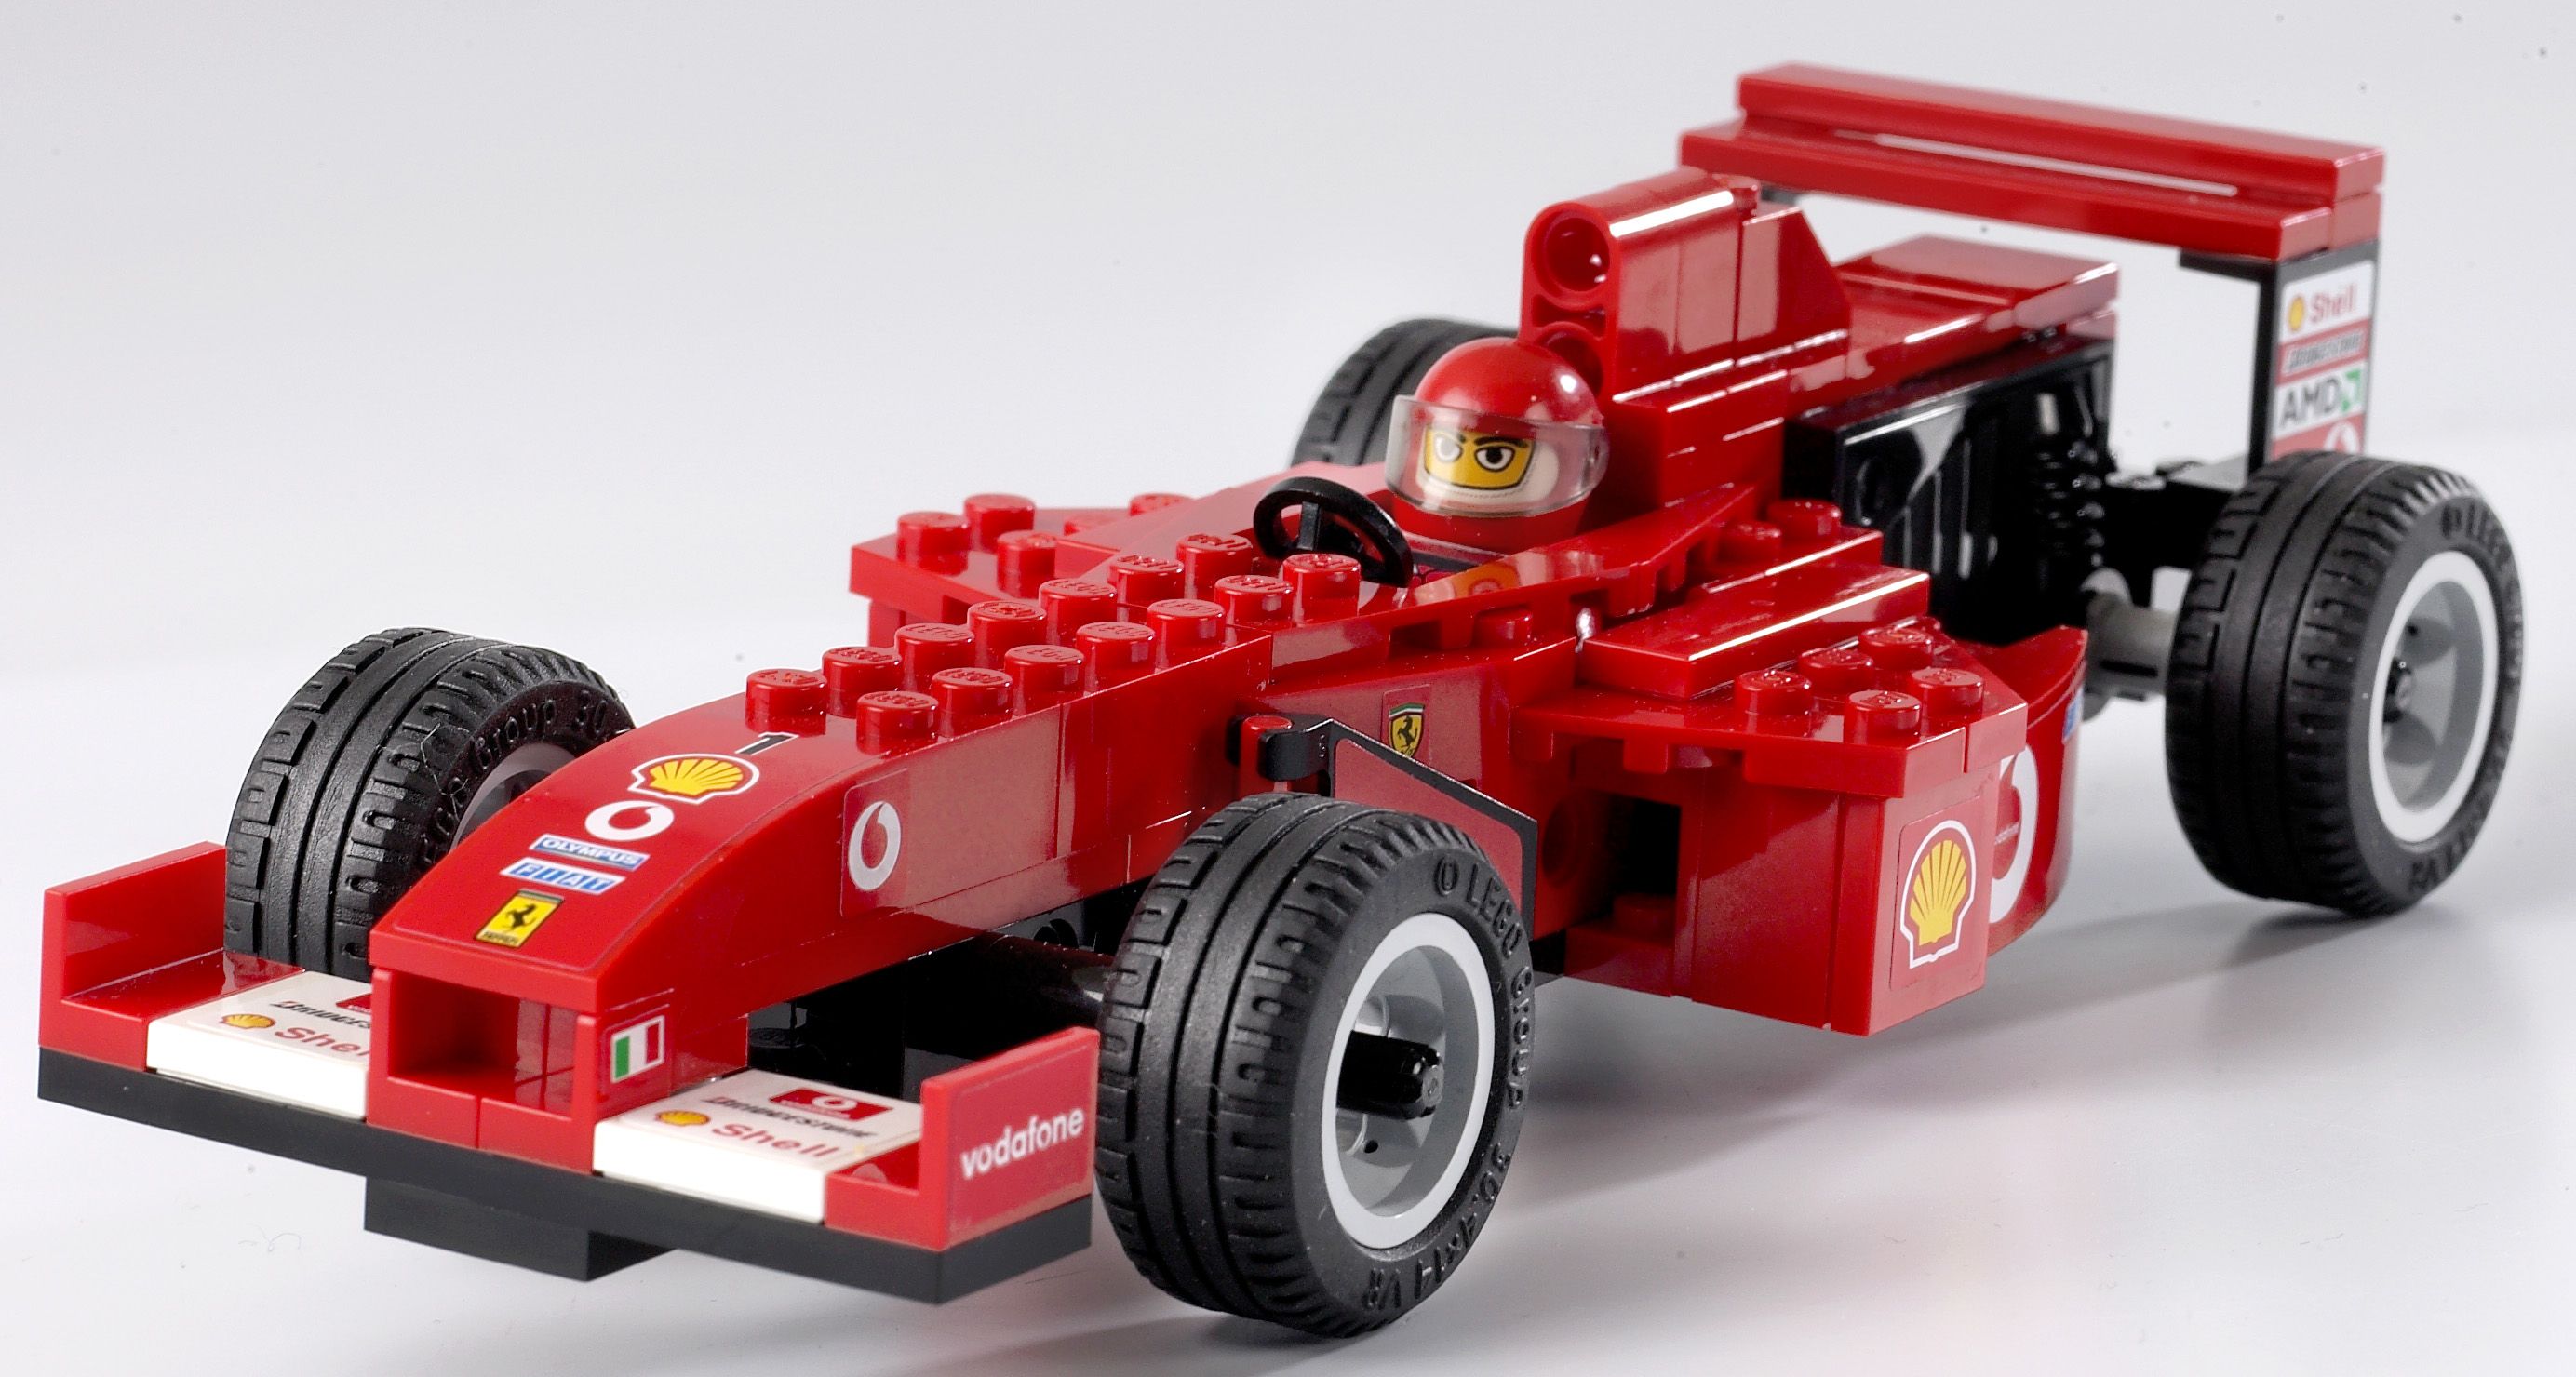 Udfordring Smadre bølge Your Guide to Every Ferrari Lego Kit Ever Made